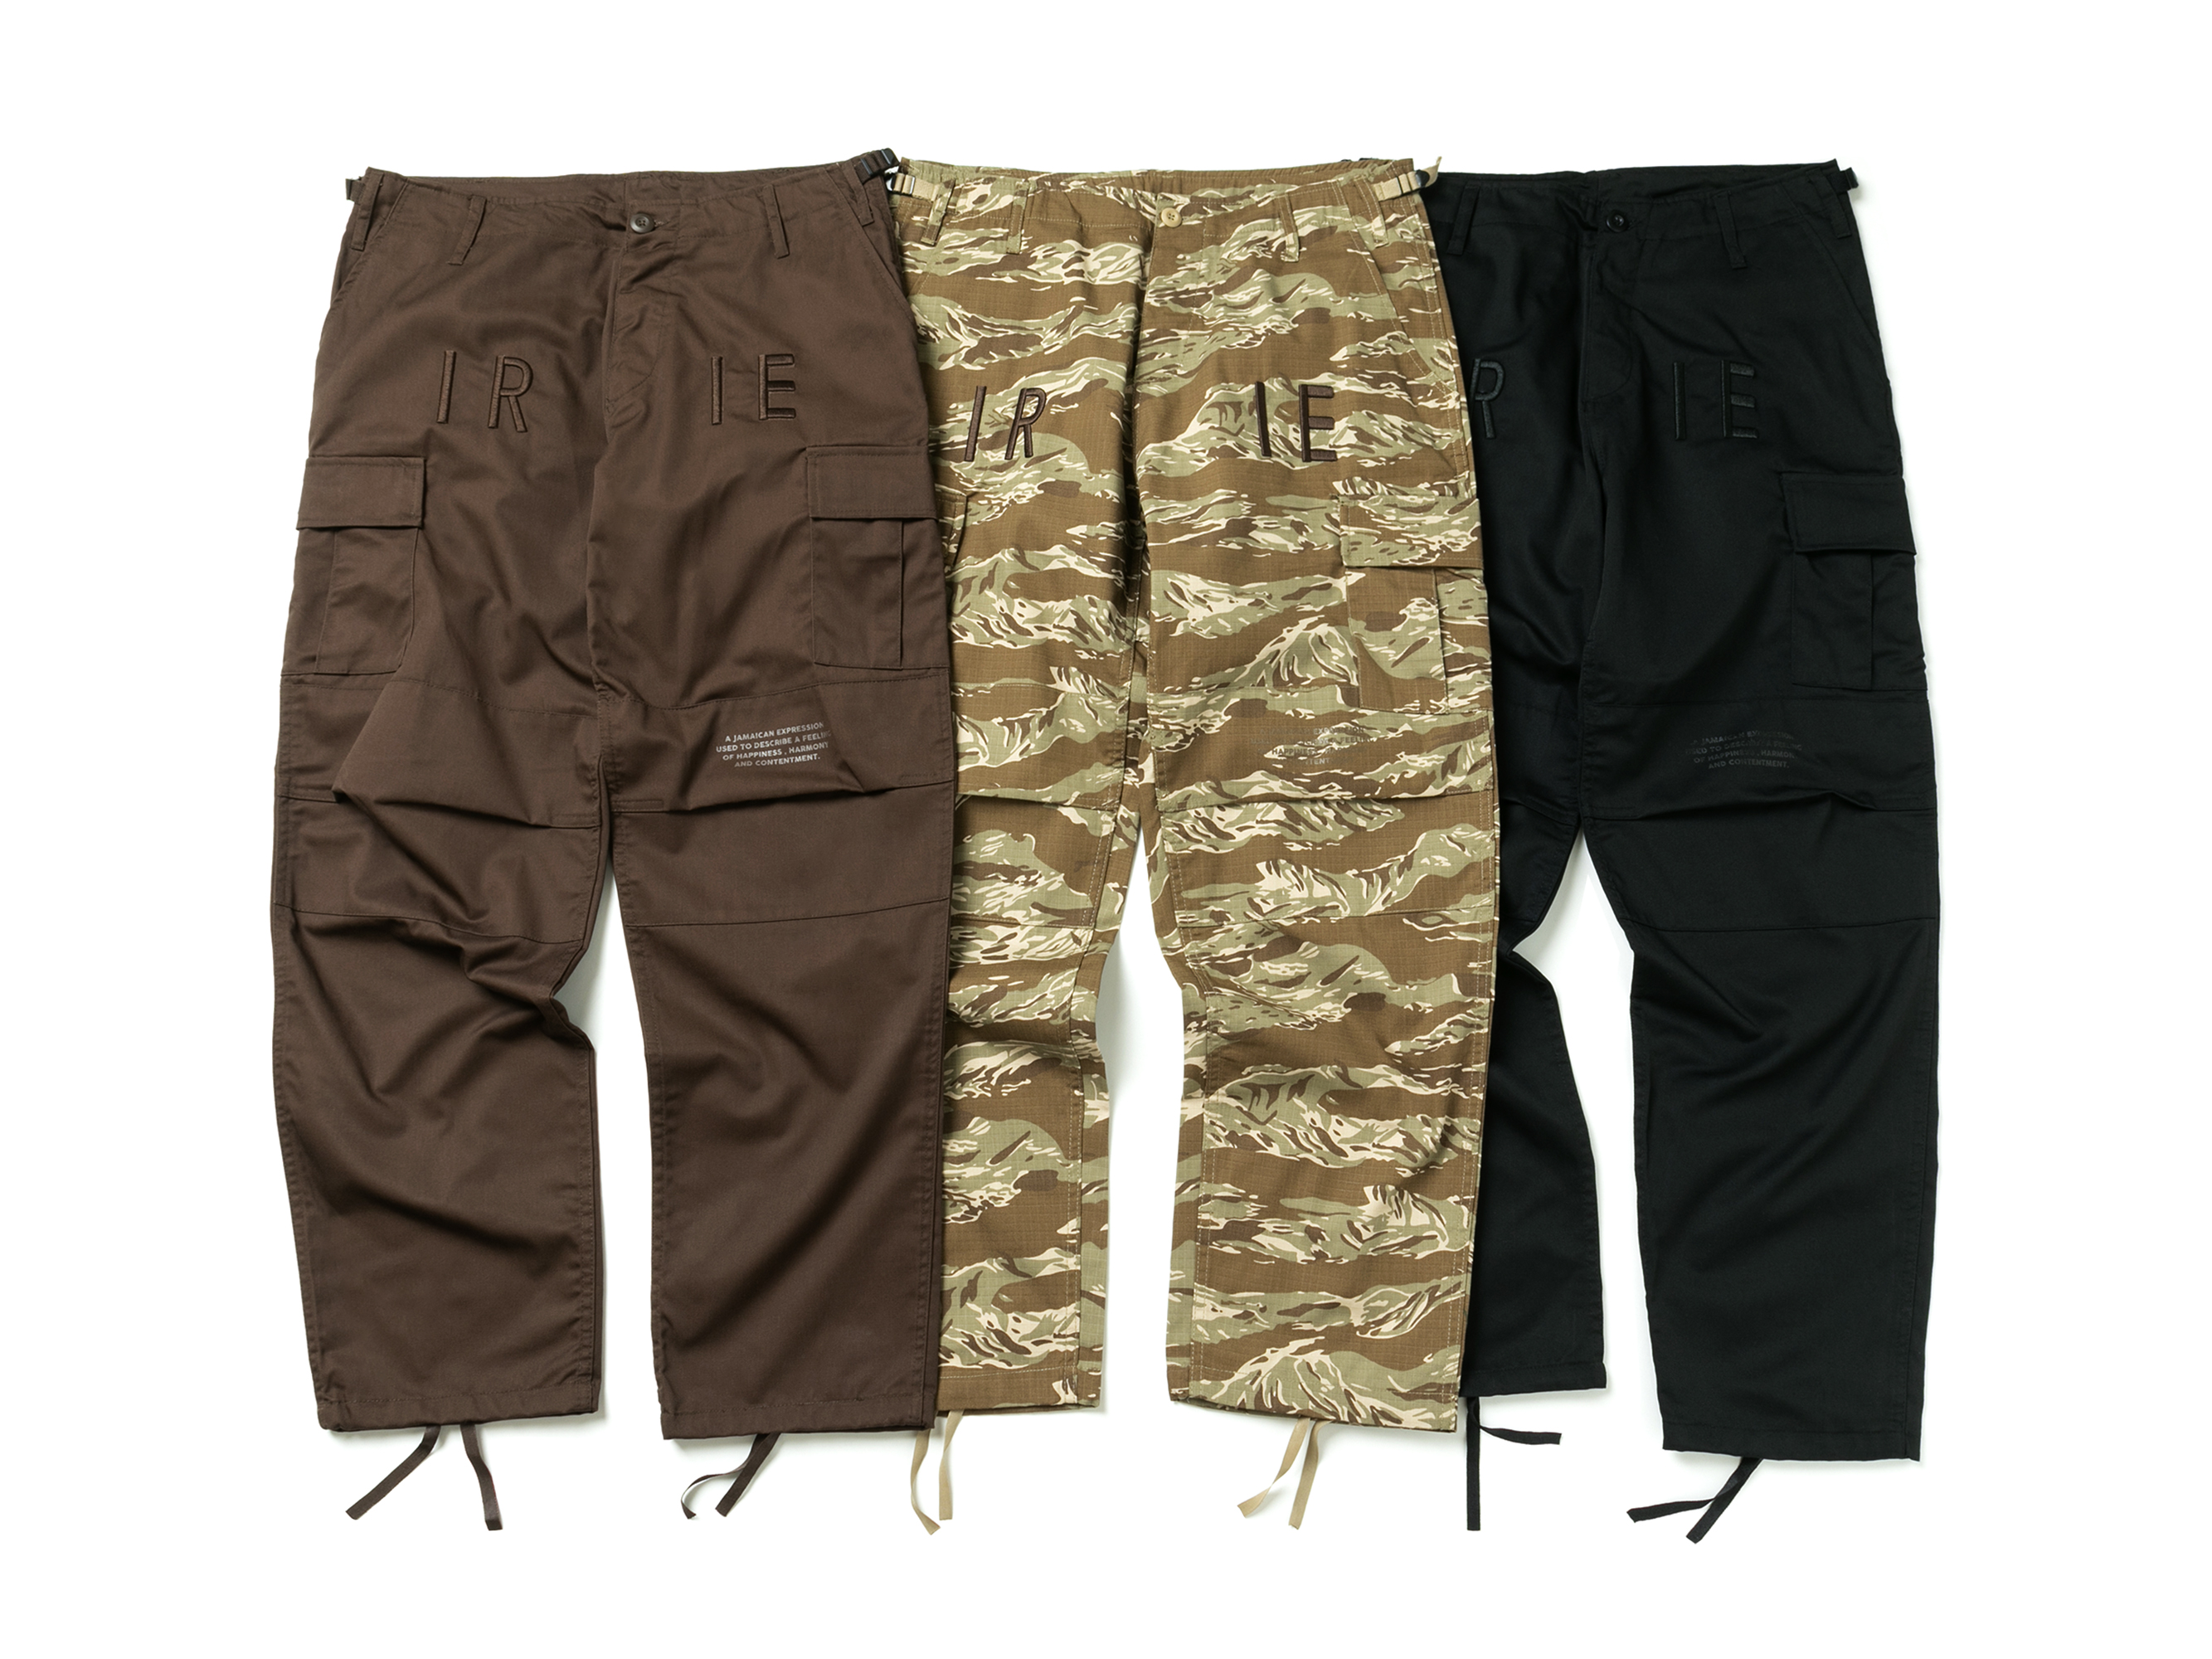 3D CARGO PANTS - IRIE by irielife